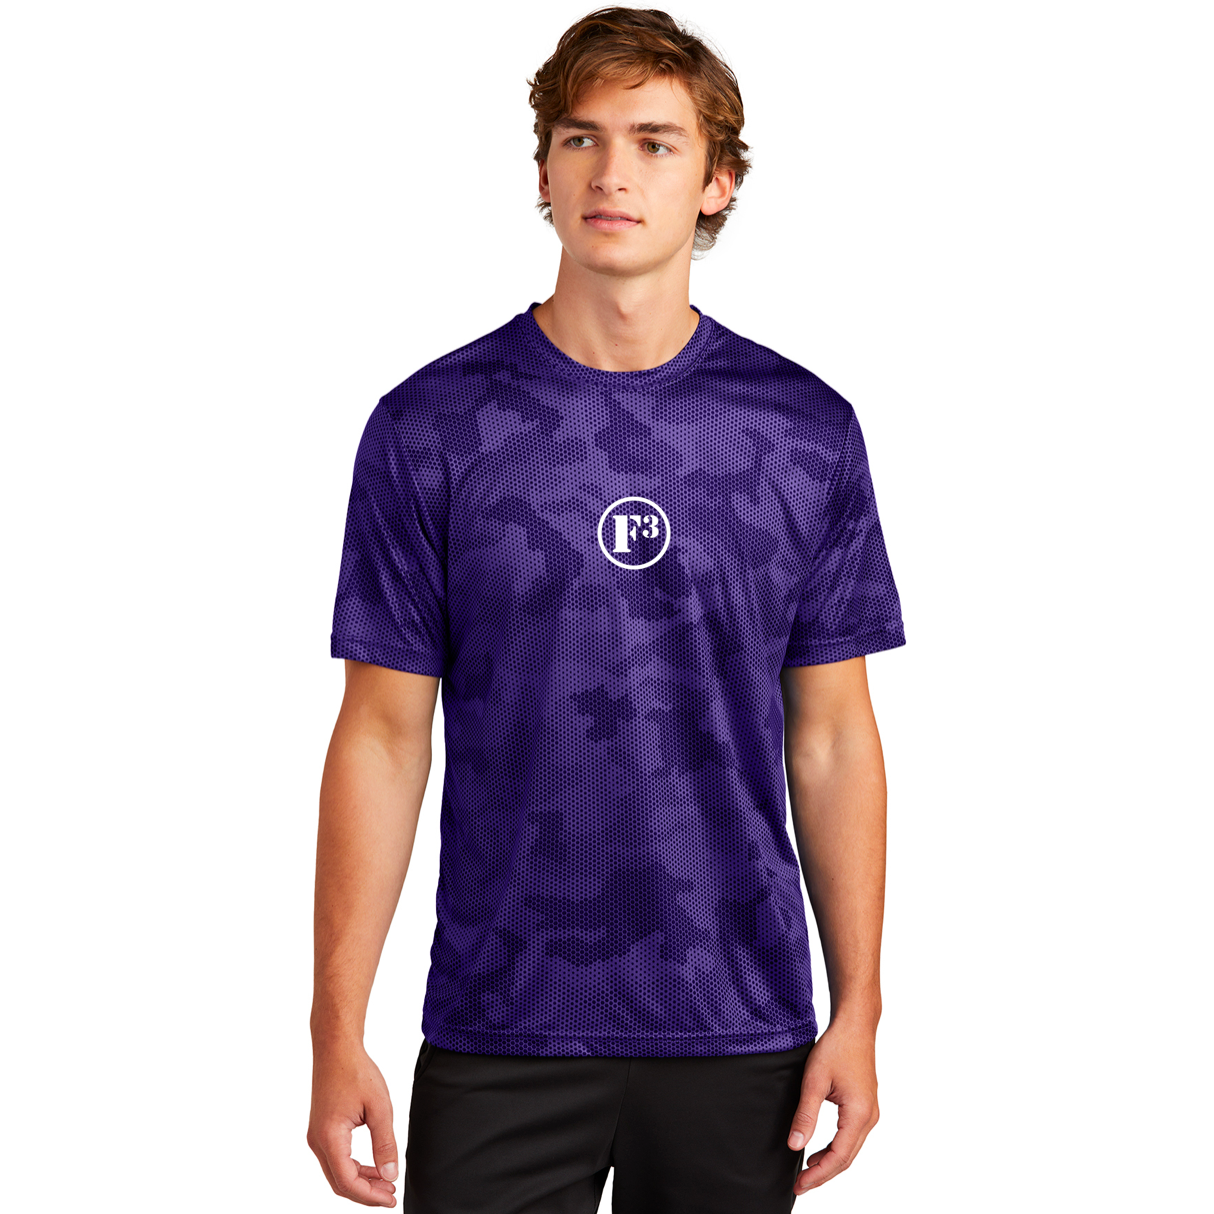 F3 Sport-Tek CamoHex Tee - Made To Order